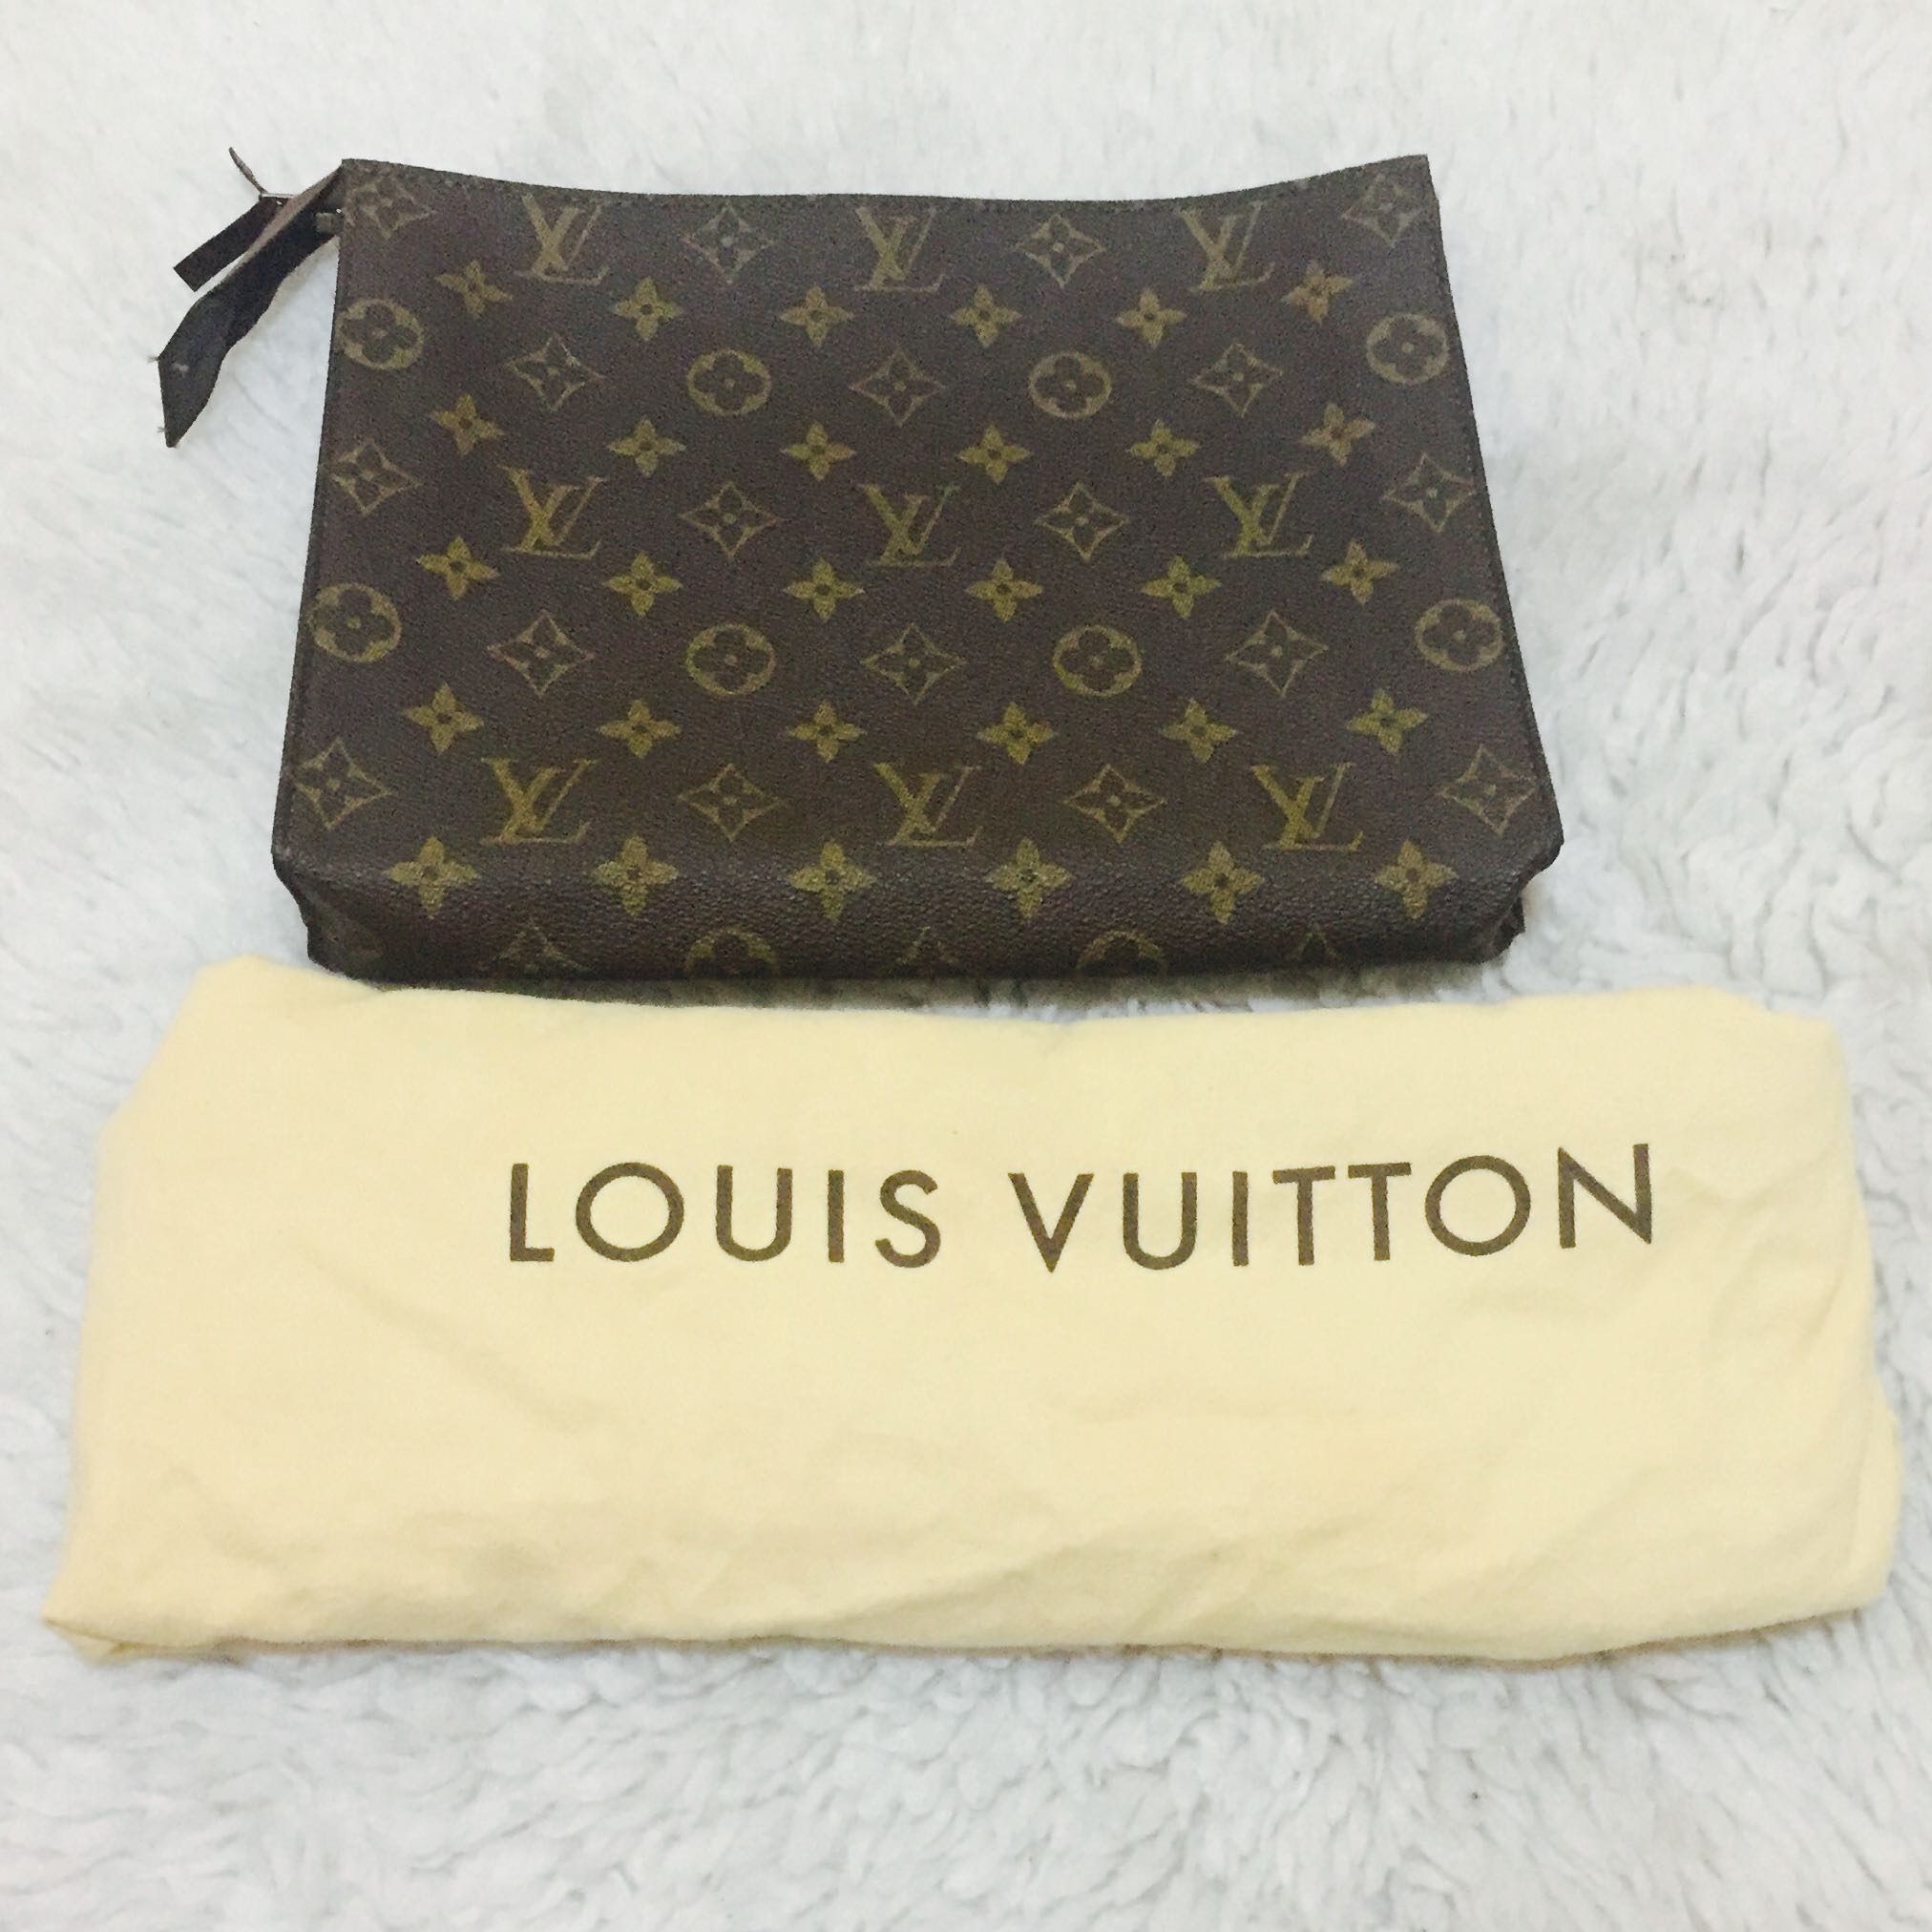 DISCONTINUED LOUIS VUITTON TOILETRY POUCH 26